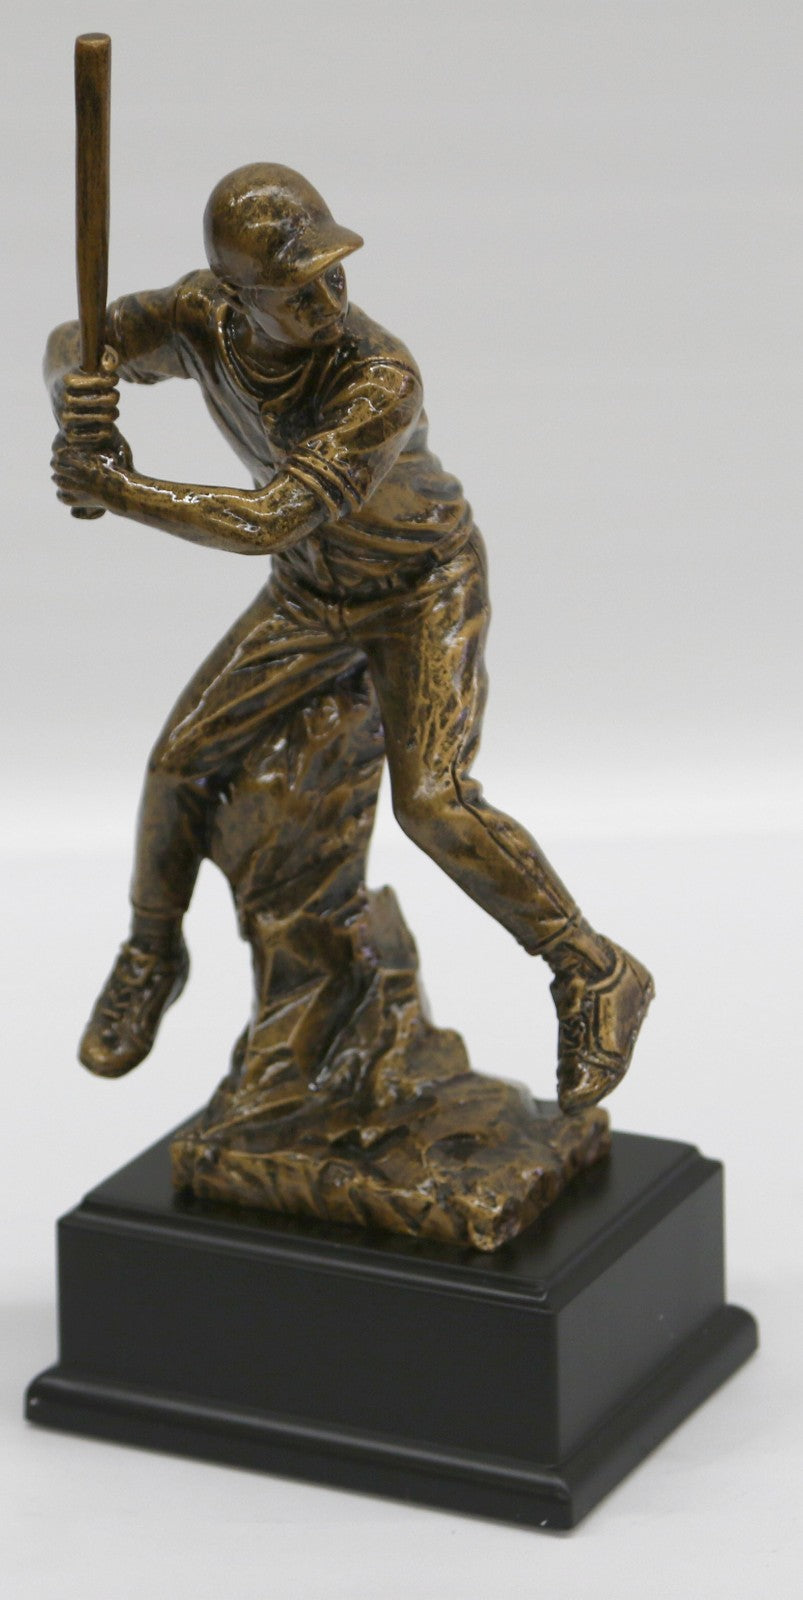 Bronze Sculpture Handcrafted Collectible Baseball Player by Milo Figurine Figure